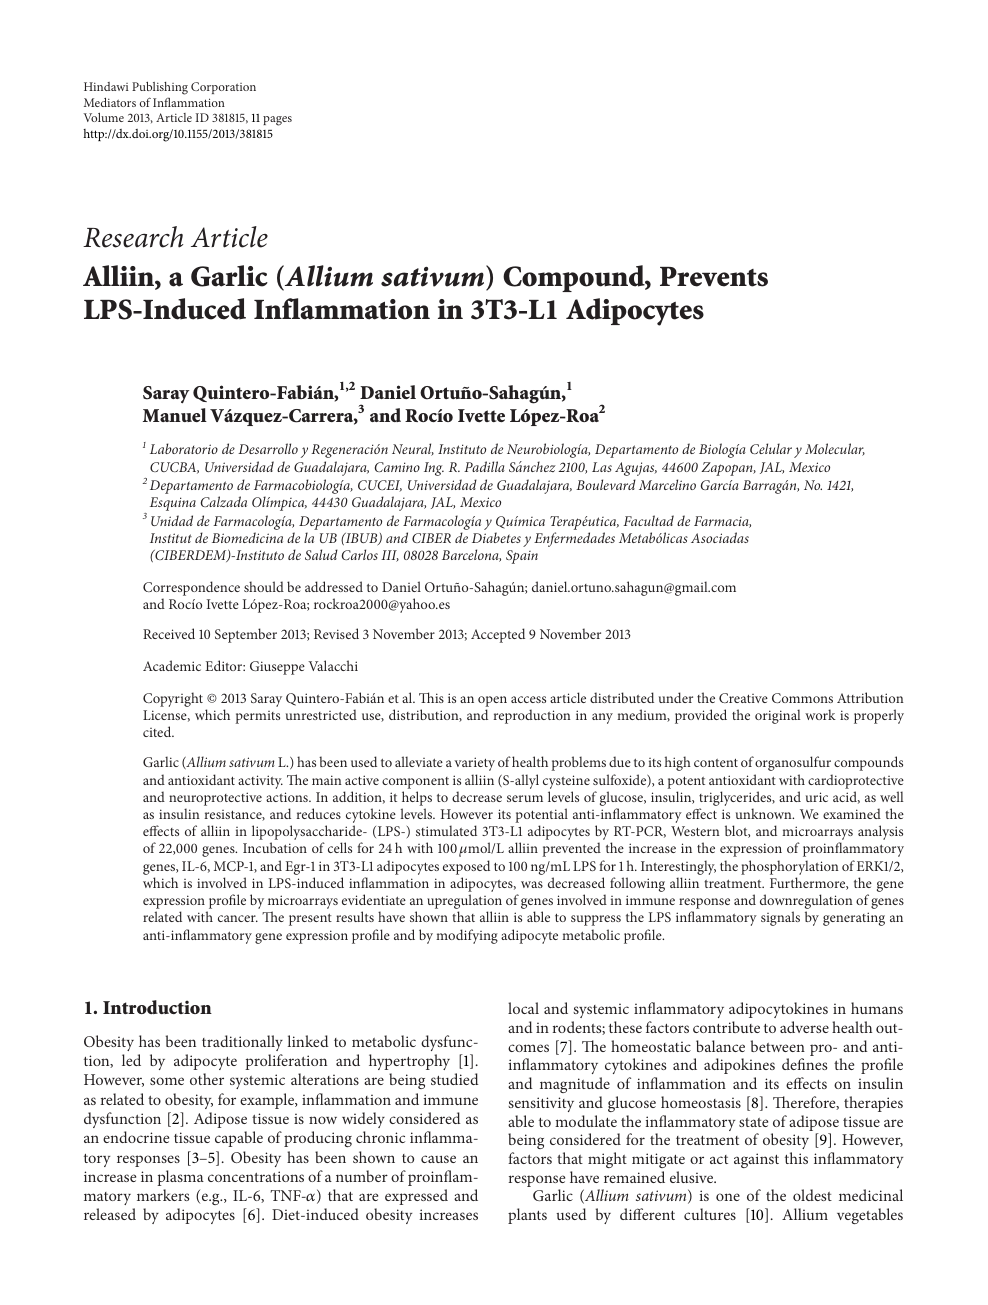 Alliin, a Garlic (Allium sativum) Compound, Prevents LPS-Induced  Inflammation in 3T3-L1 Adipocytes – topic of research paper in Biological  sciences. Download scholarly article PDF and read for free on CyberLeninka  open science